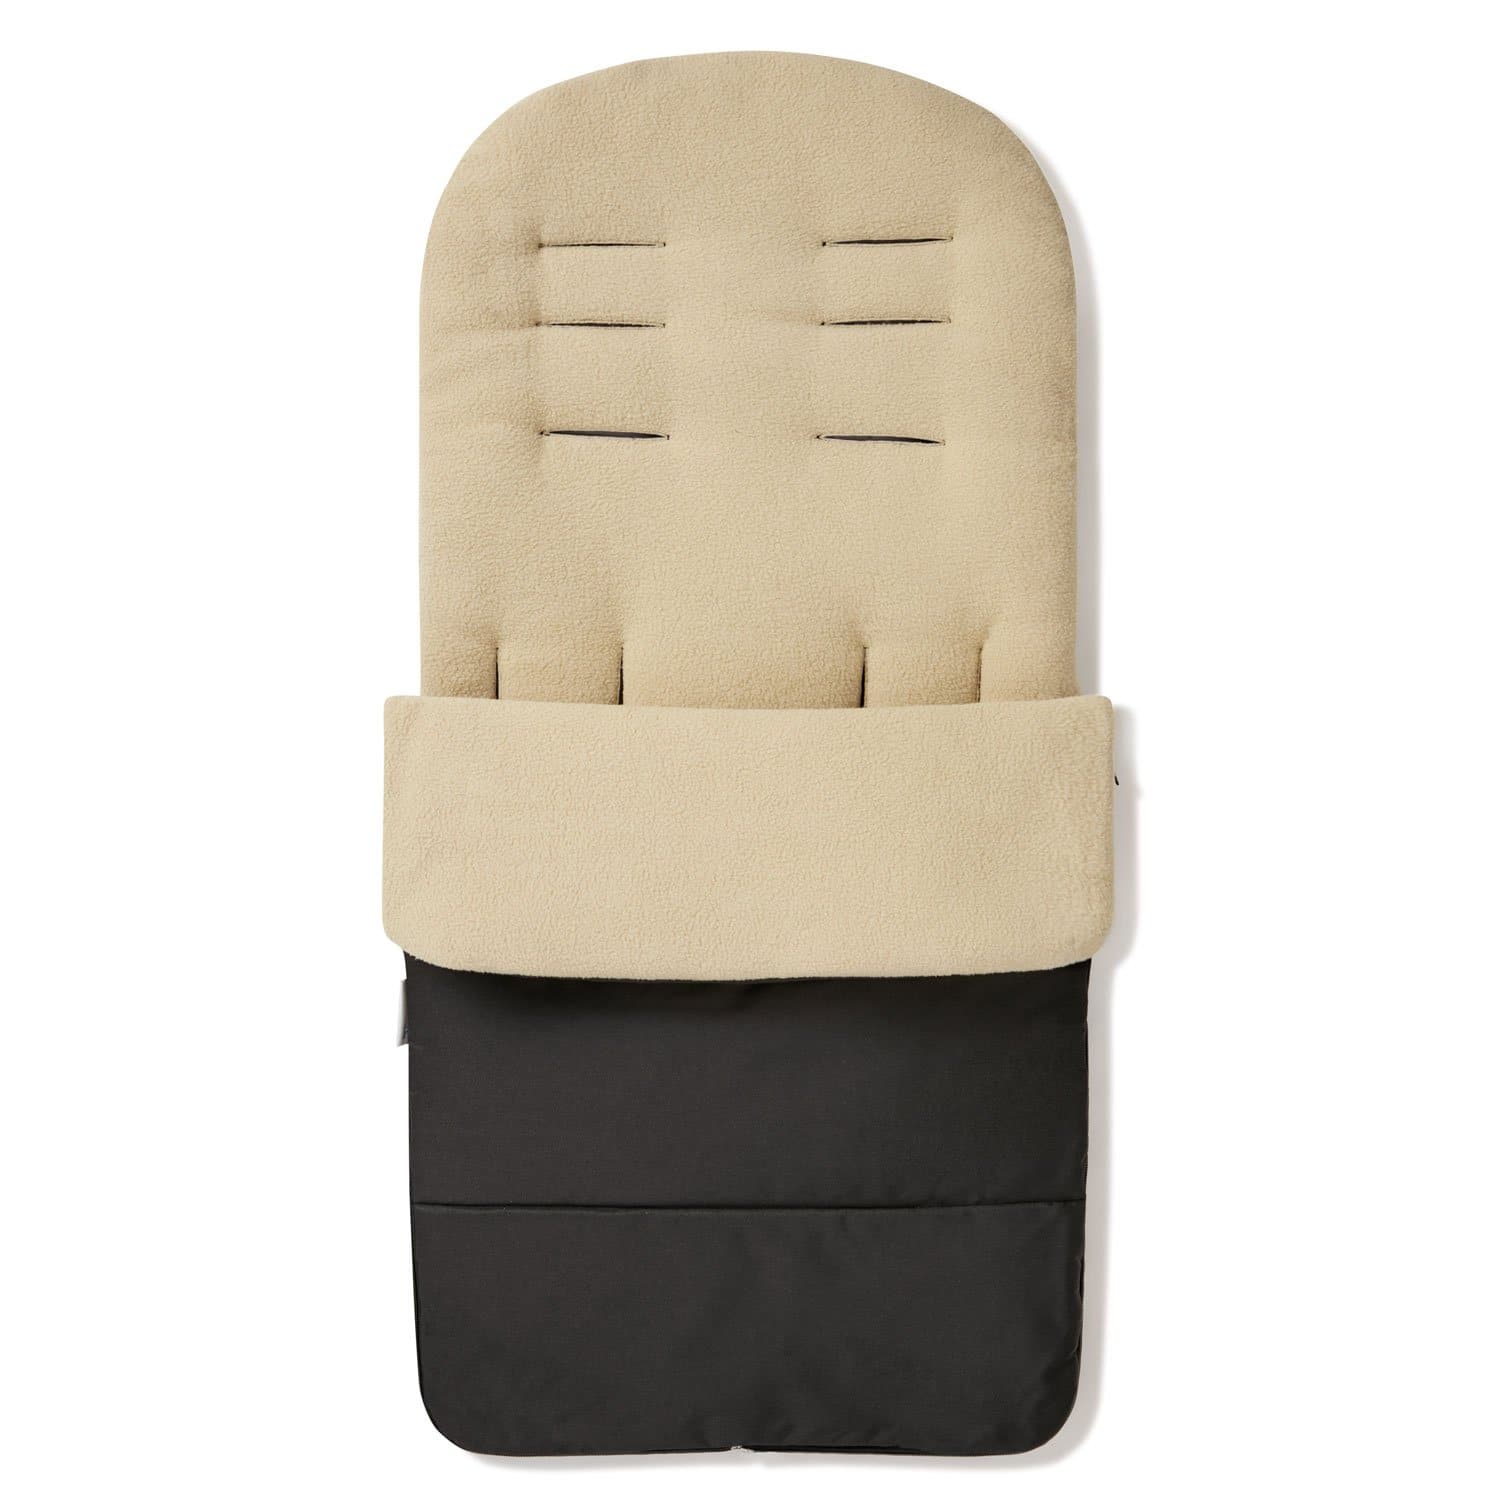 Premium Footmuff / Cosy Toes Compatible with BabyDan - Desert Sand / Fits All Models | For Your Little One